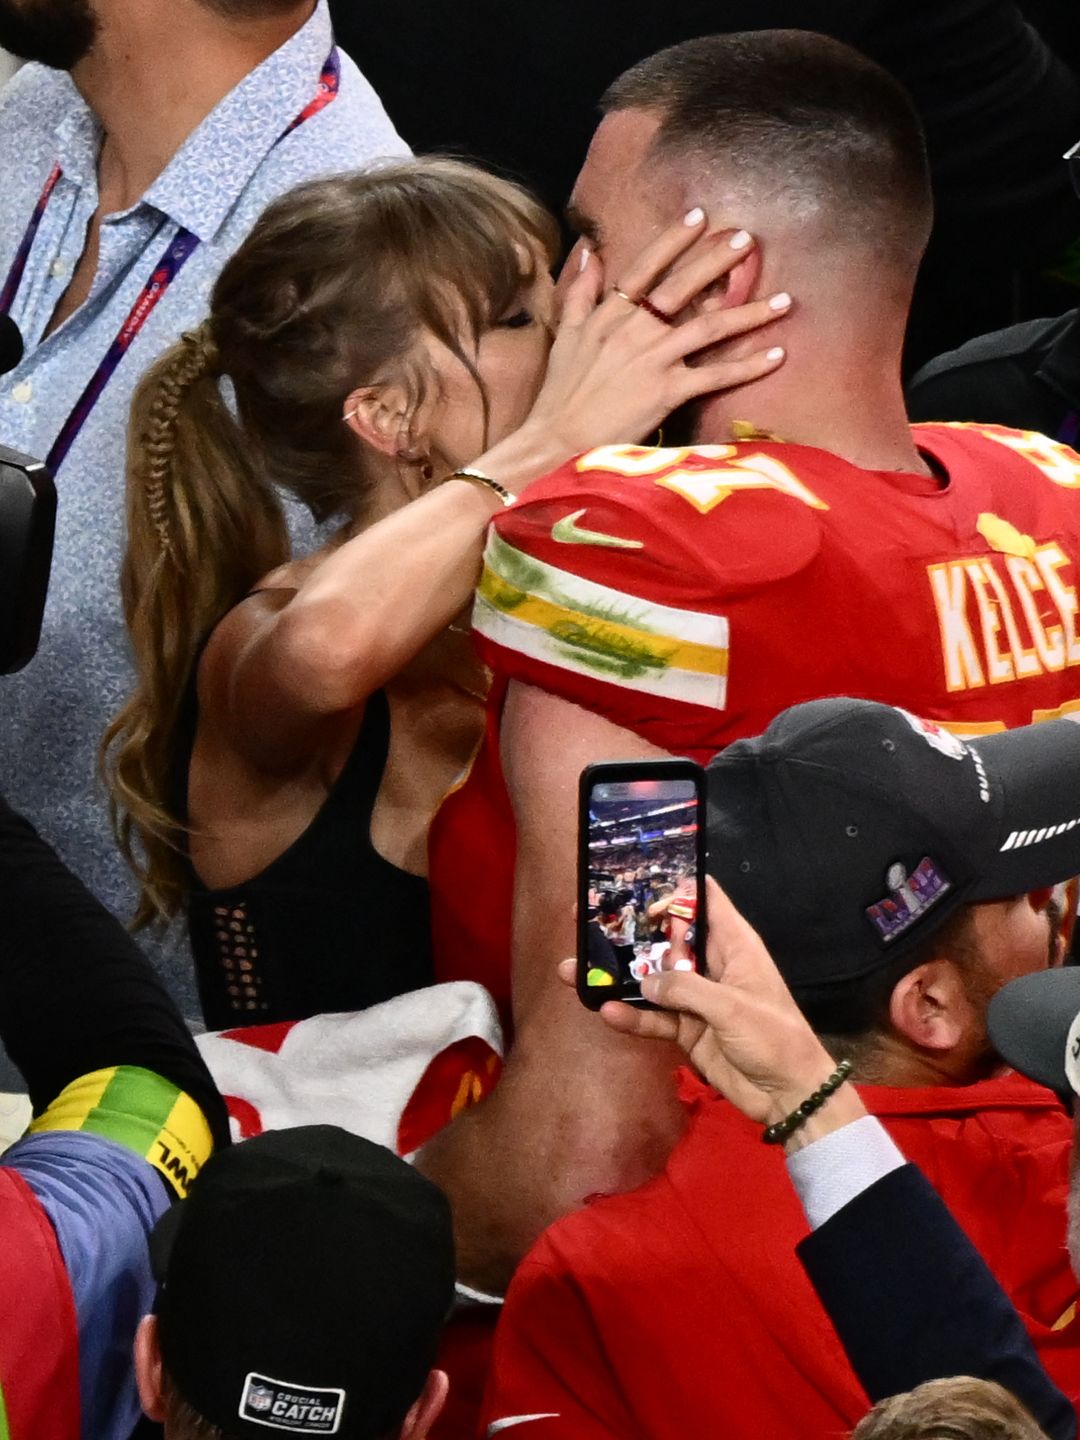 US singer-songwriter Taylor Swift kisses Kansas City Chiefs' tight end #87 Travis Kelce after the Chiefs won Super Bowl LVIII against the San Francisco 49ers at Allegiant Stadium in Las Vegas, Nevada, February 11, 2024. (Photo by Patrick T. Fallon / AFP) (Photo by PATRICK T. FALLON/AFP via Getty Images)